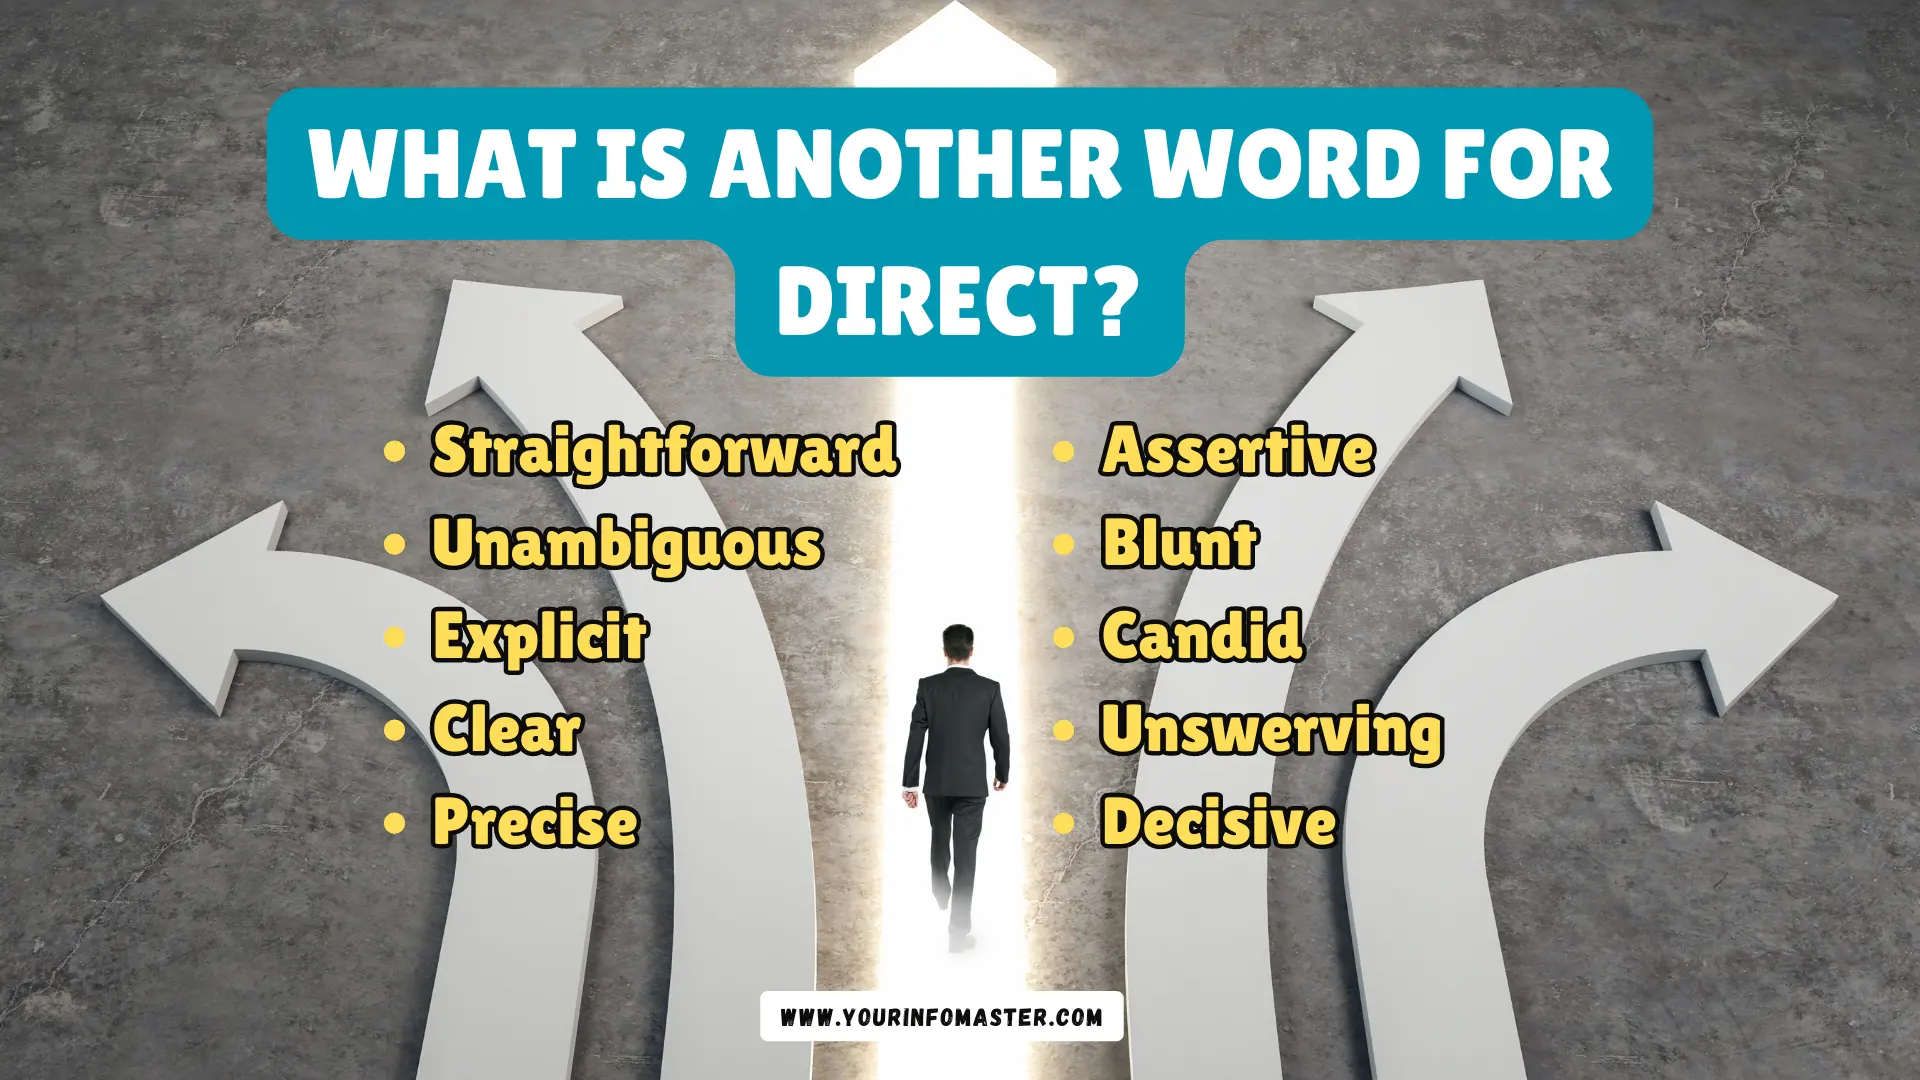 What is another word for Direct